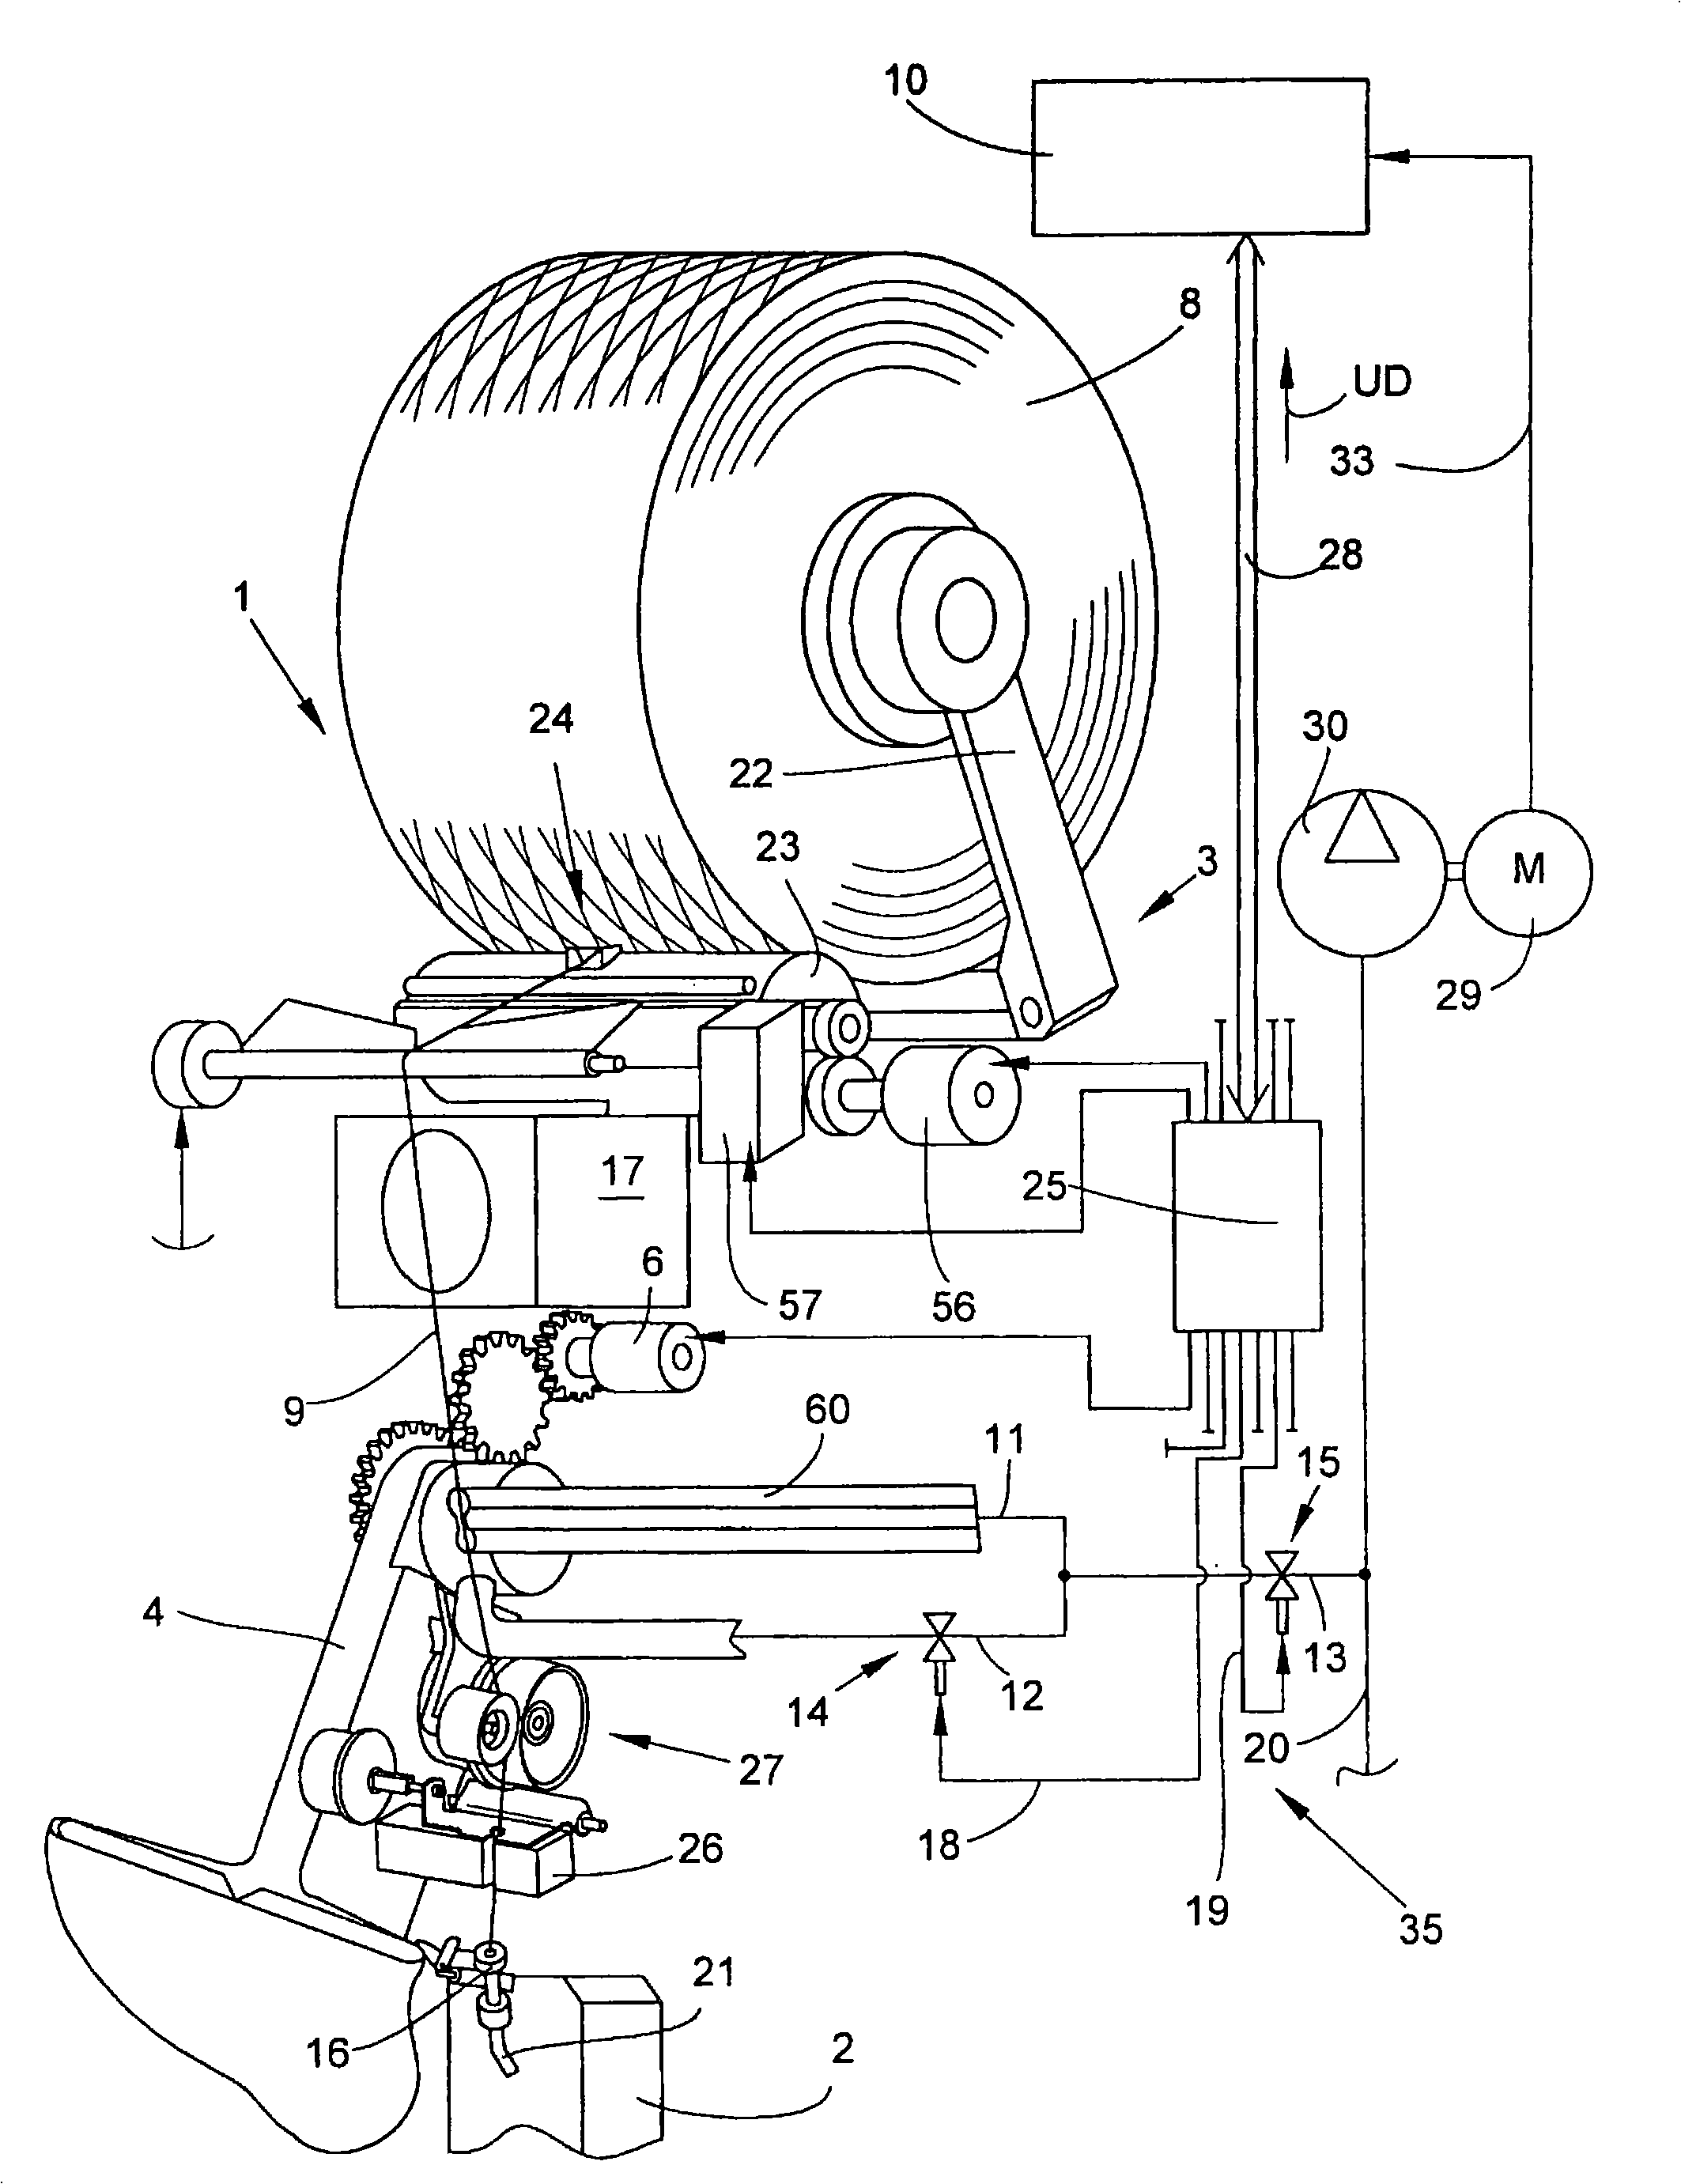 Method and apparatus for operating a textile machine which produces crosswound bobbins